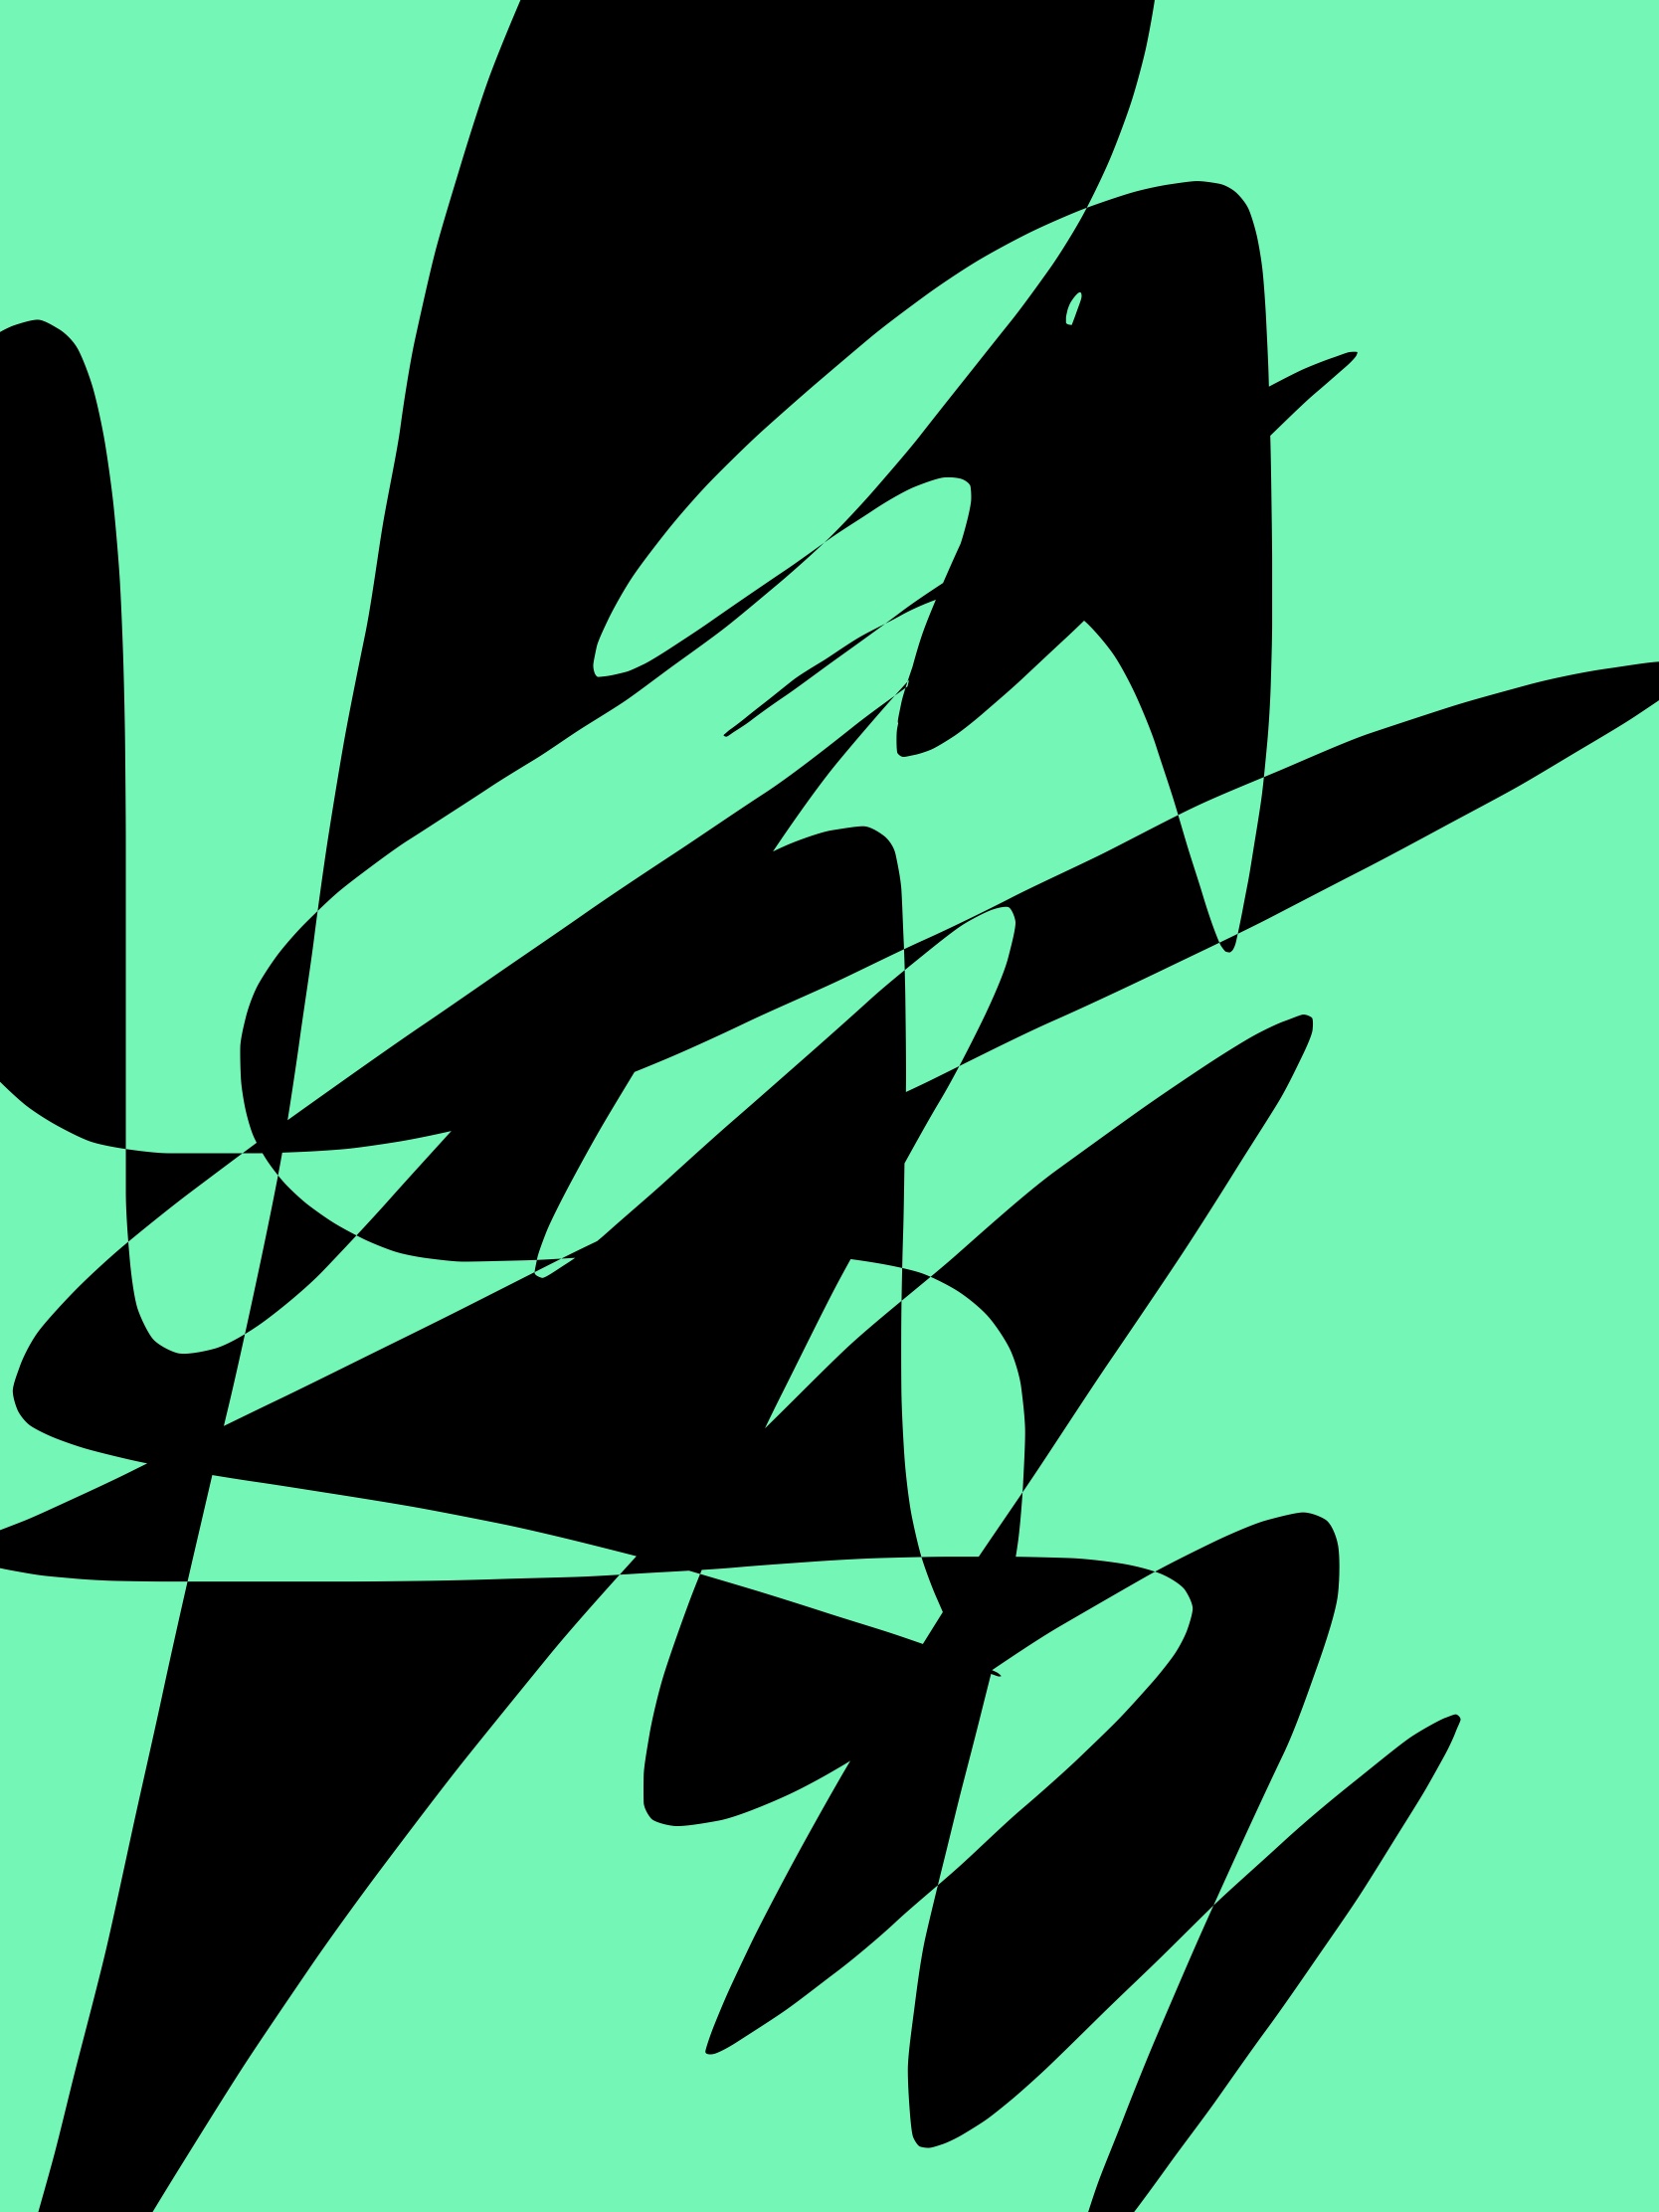 Green black abstract